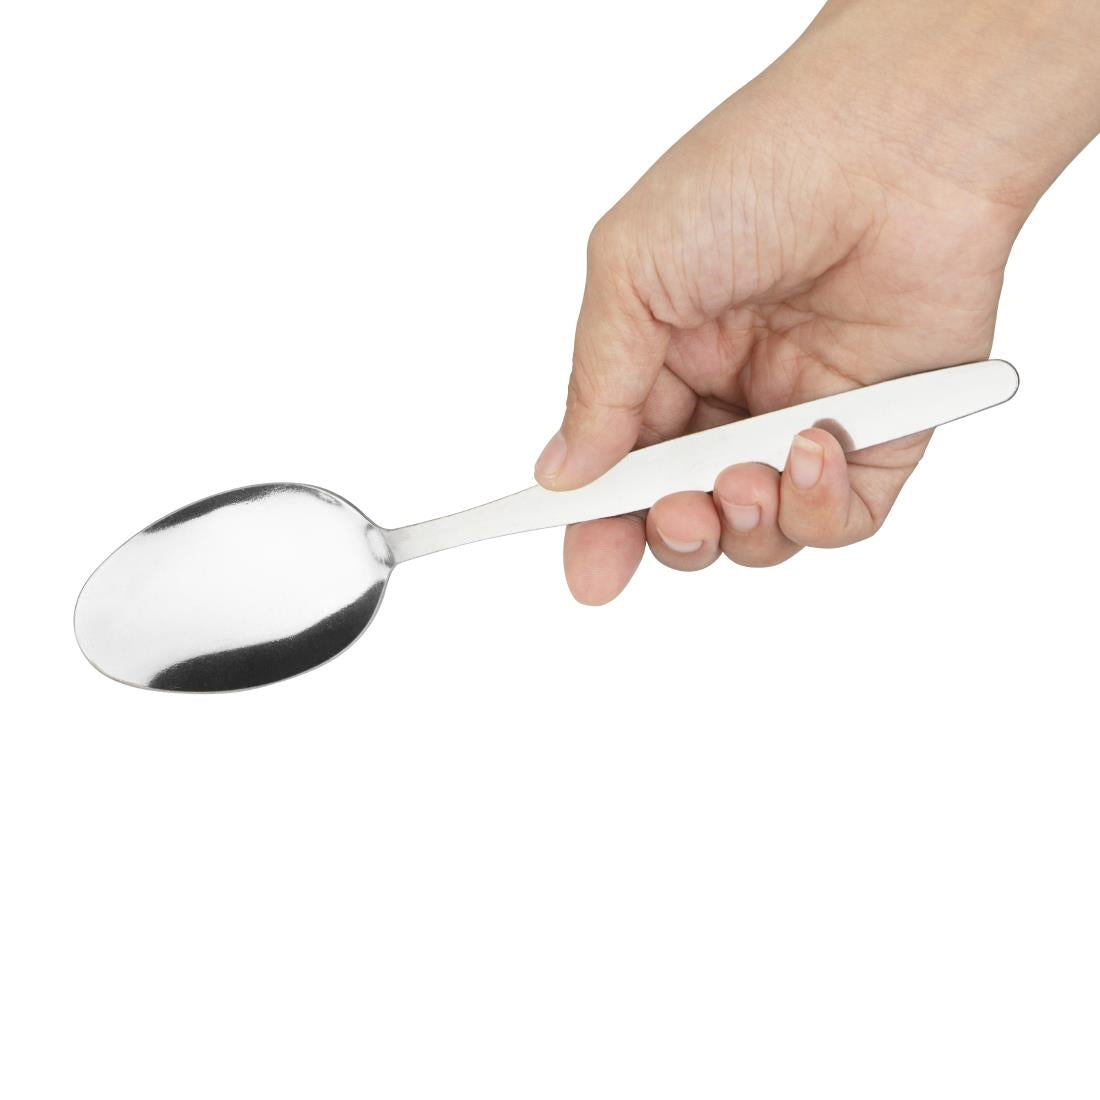 Olympia Kelso Service Spoon (Pack of 12)